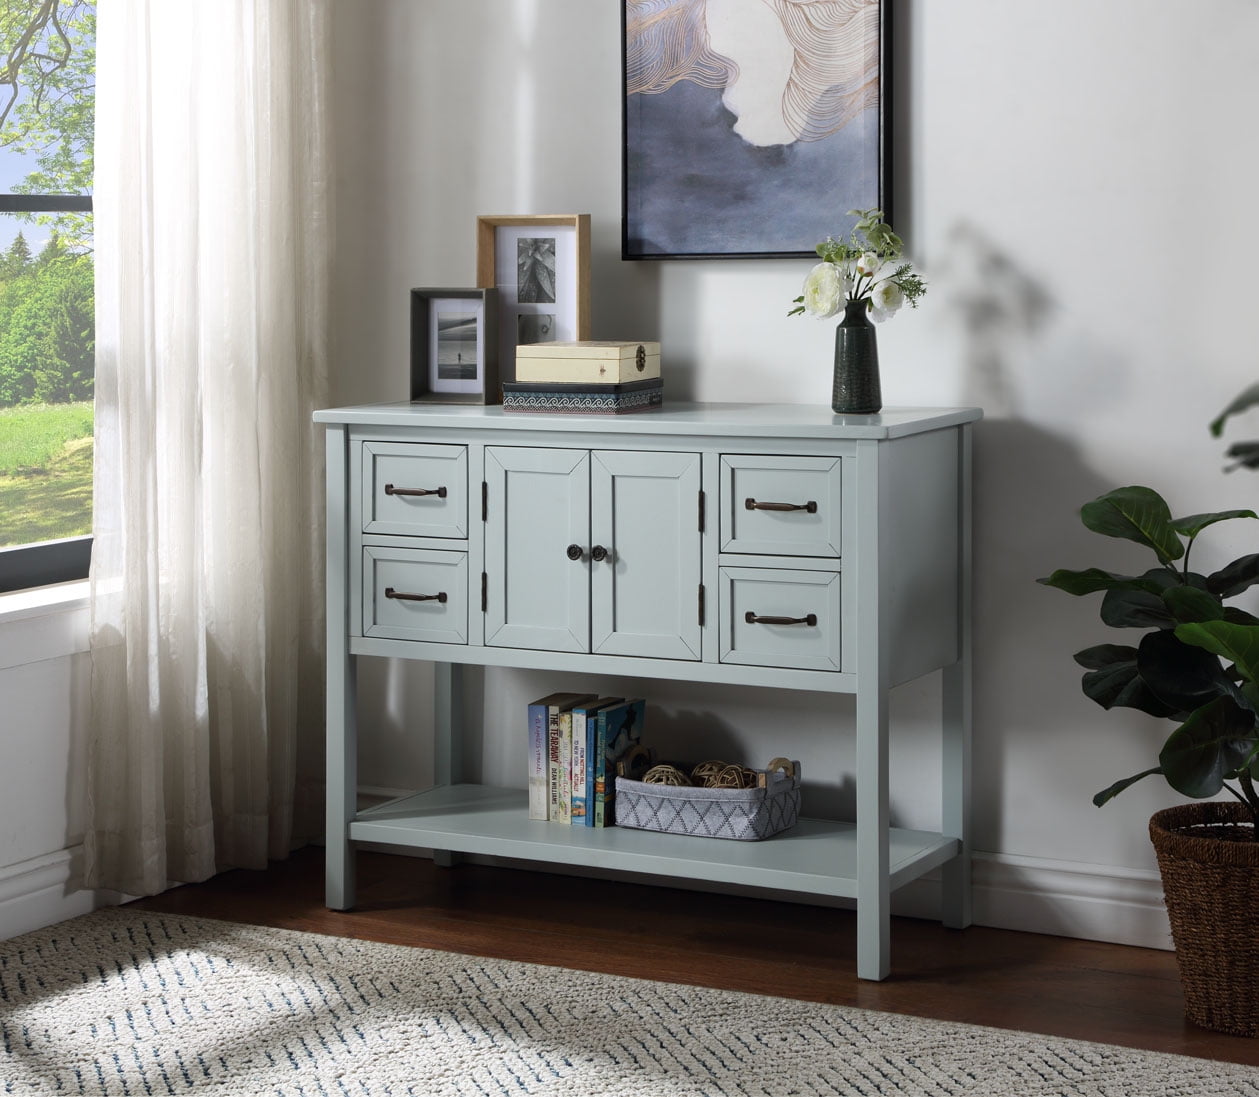 2 Drawers and 1 Shelf Cabinet White S7-BSB-010-CA Living Room Entryway Console Sideboard Table SDHYL Chest Storage Cabinet Kitchen Cupboard Organizer